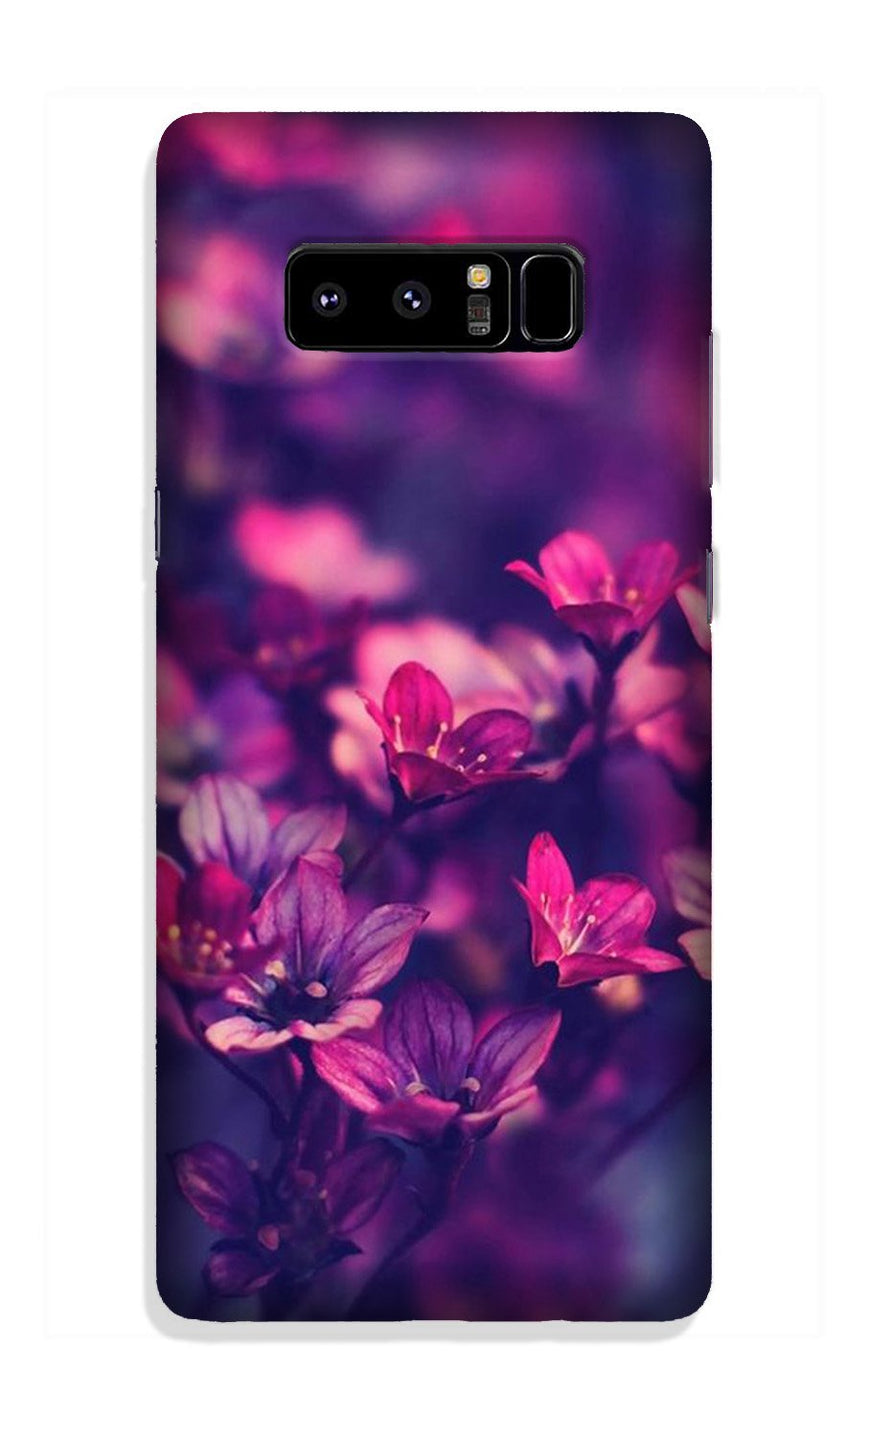 flowers Case for Galaxy Note 8